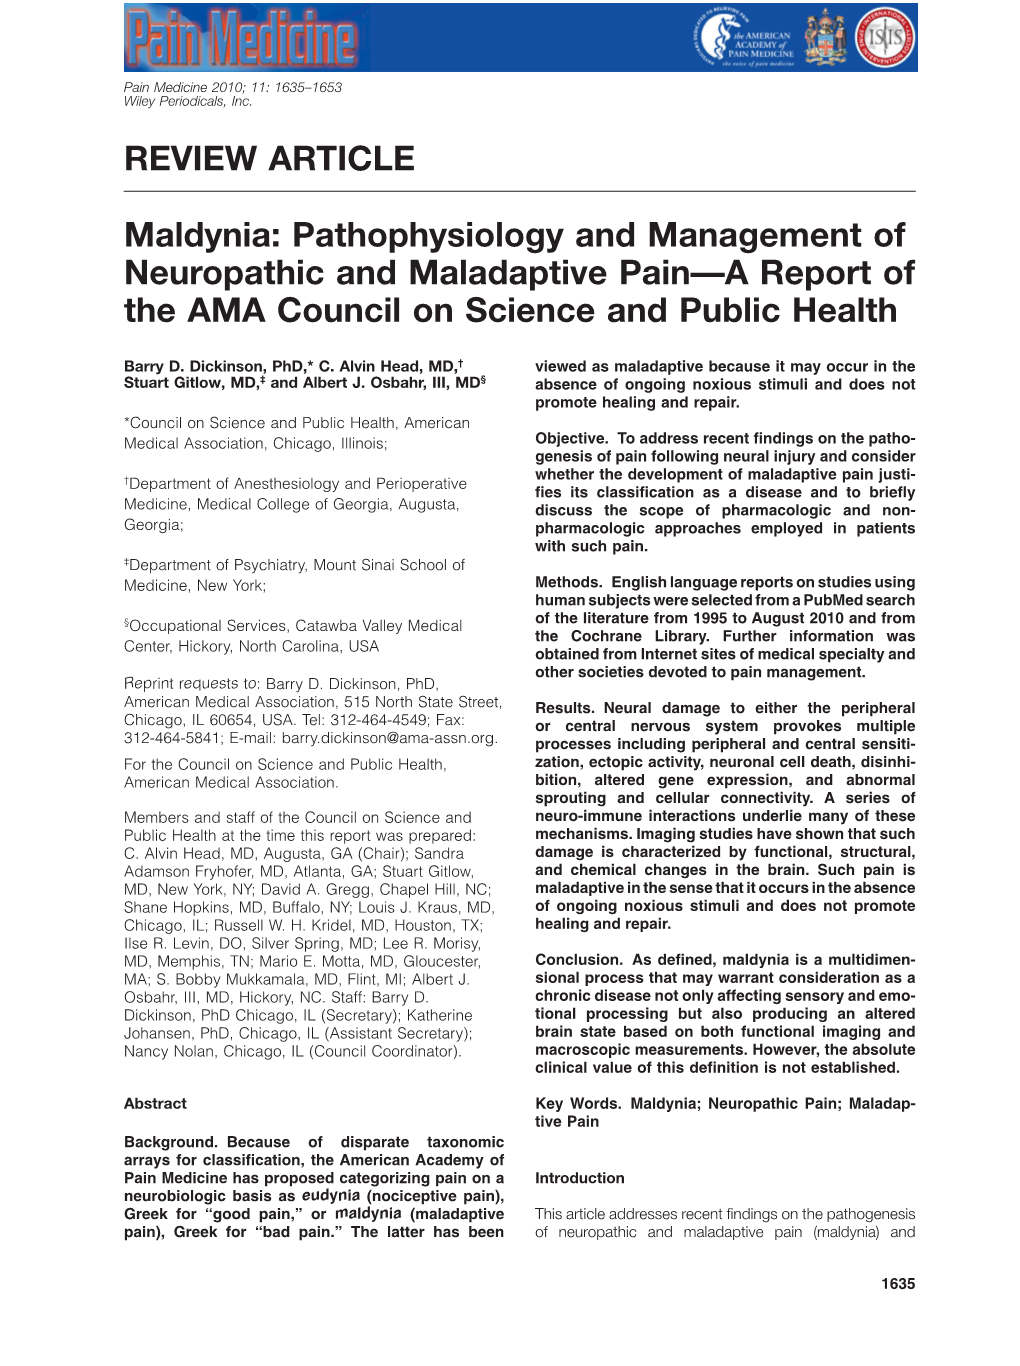 Maldynia: Pathophysiology and Management of Neuropathic and Maladaptive Pain—A Report Of